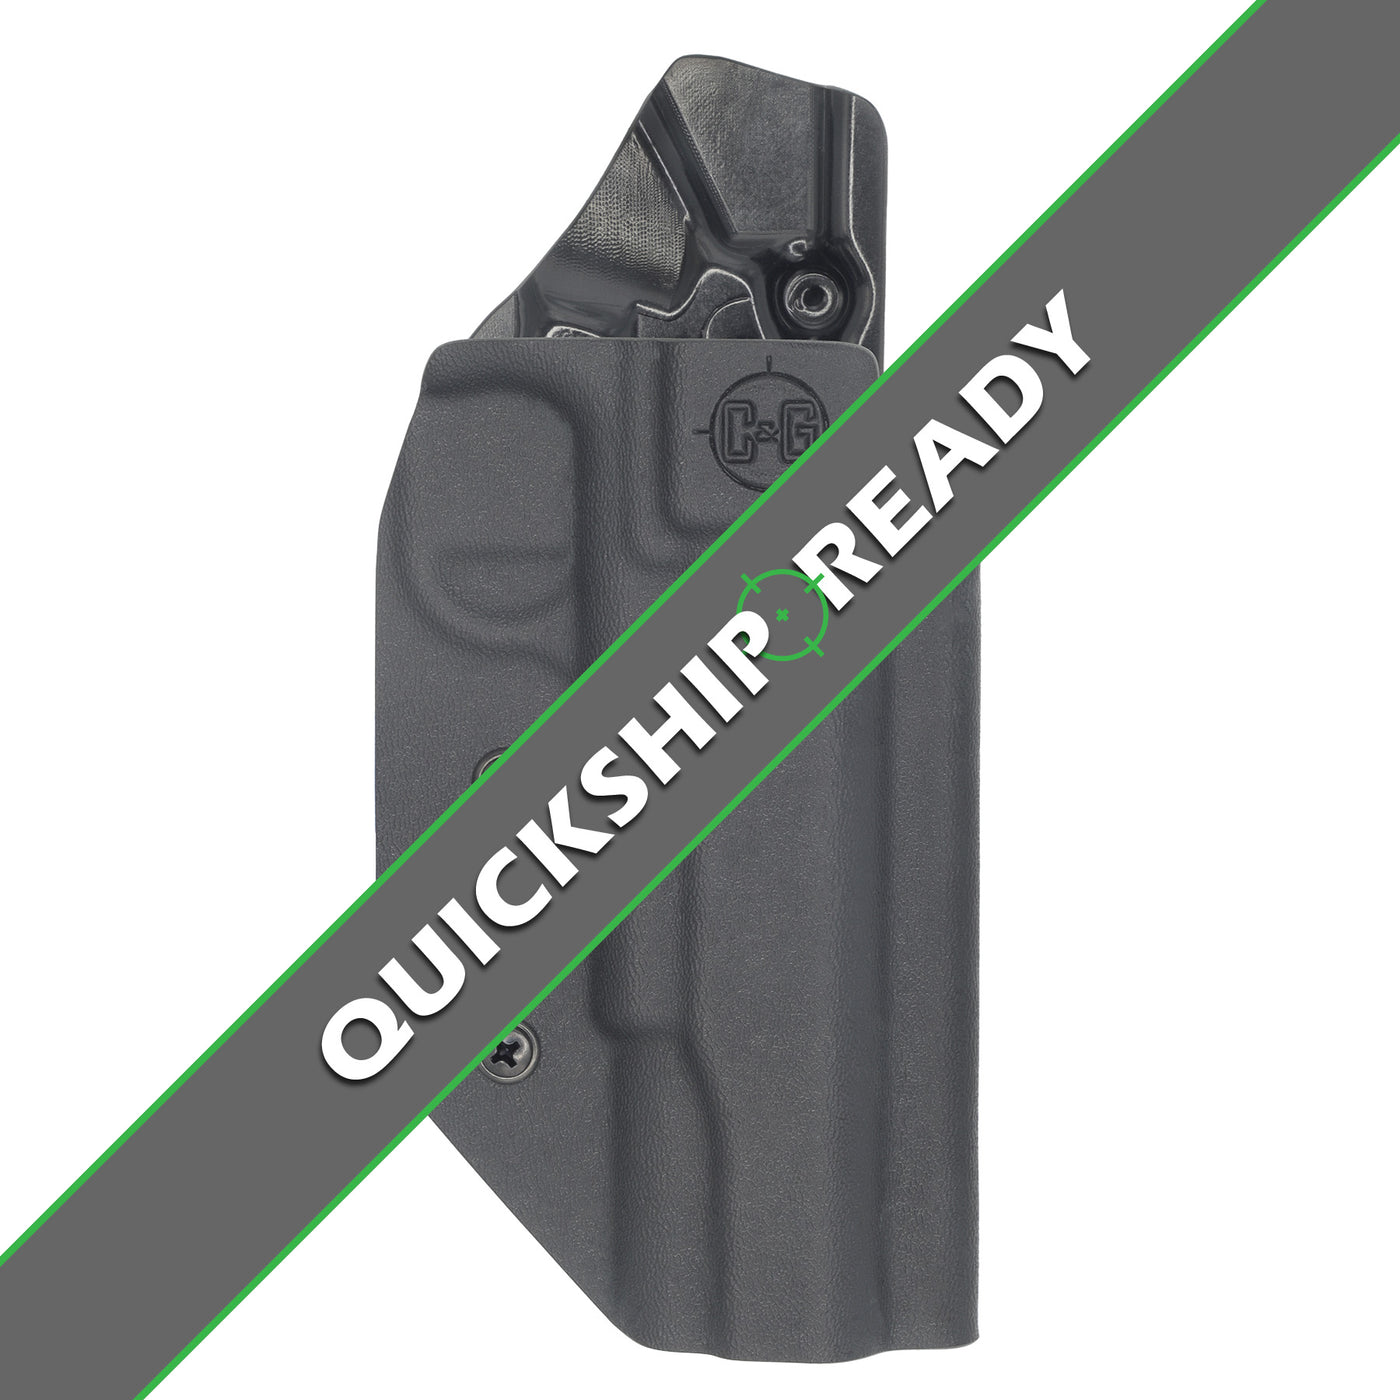 C&G Holsters Quickship Competition Starter Kit that is IDPA, USPSA & 3-GUN legal for 1911